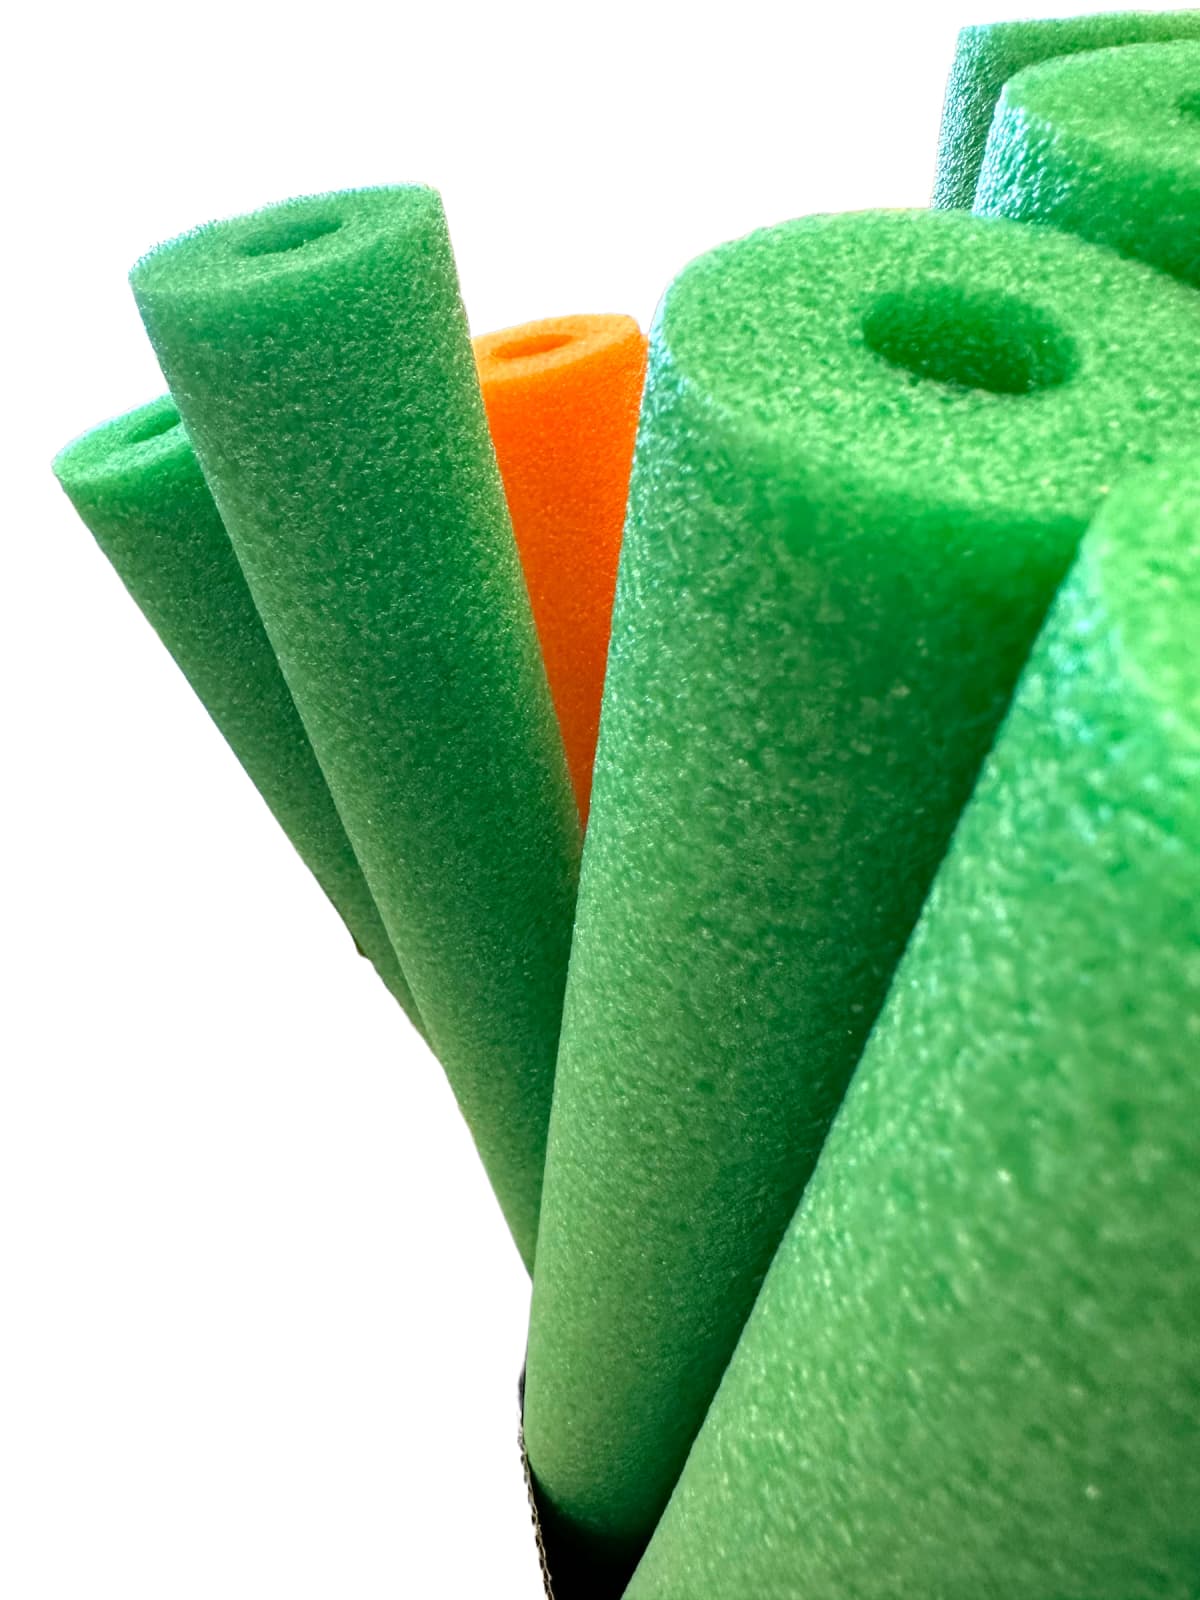 Green pool noodles against white background